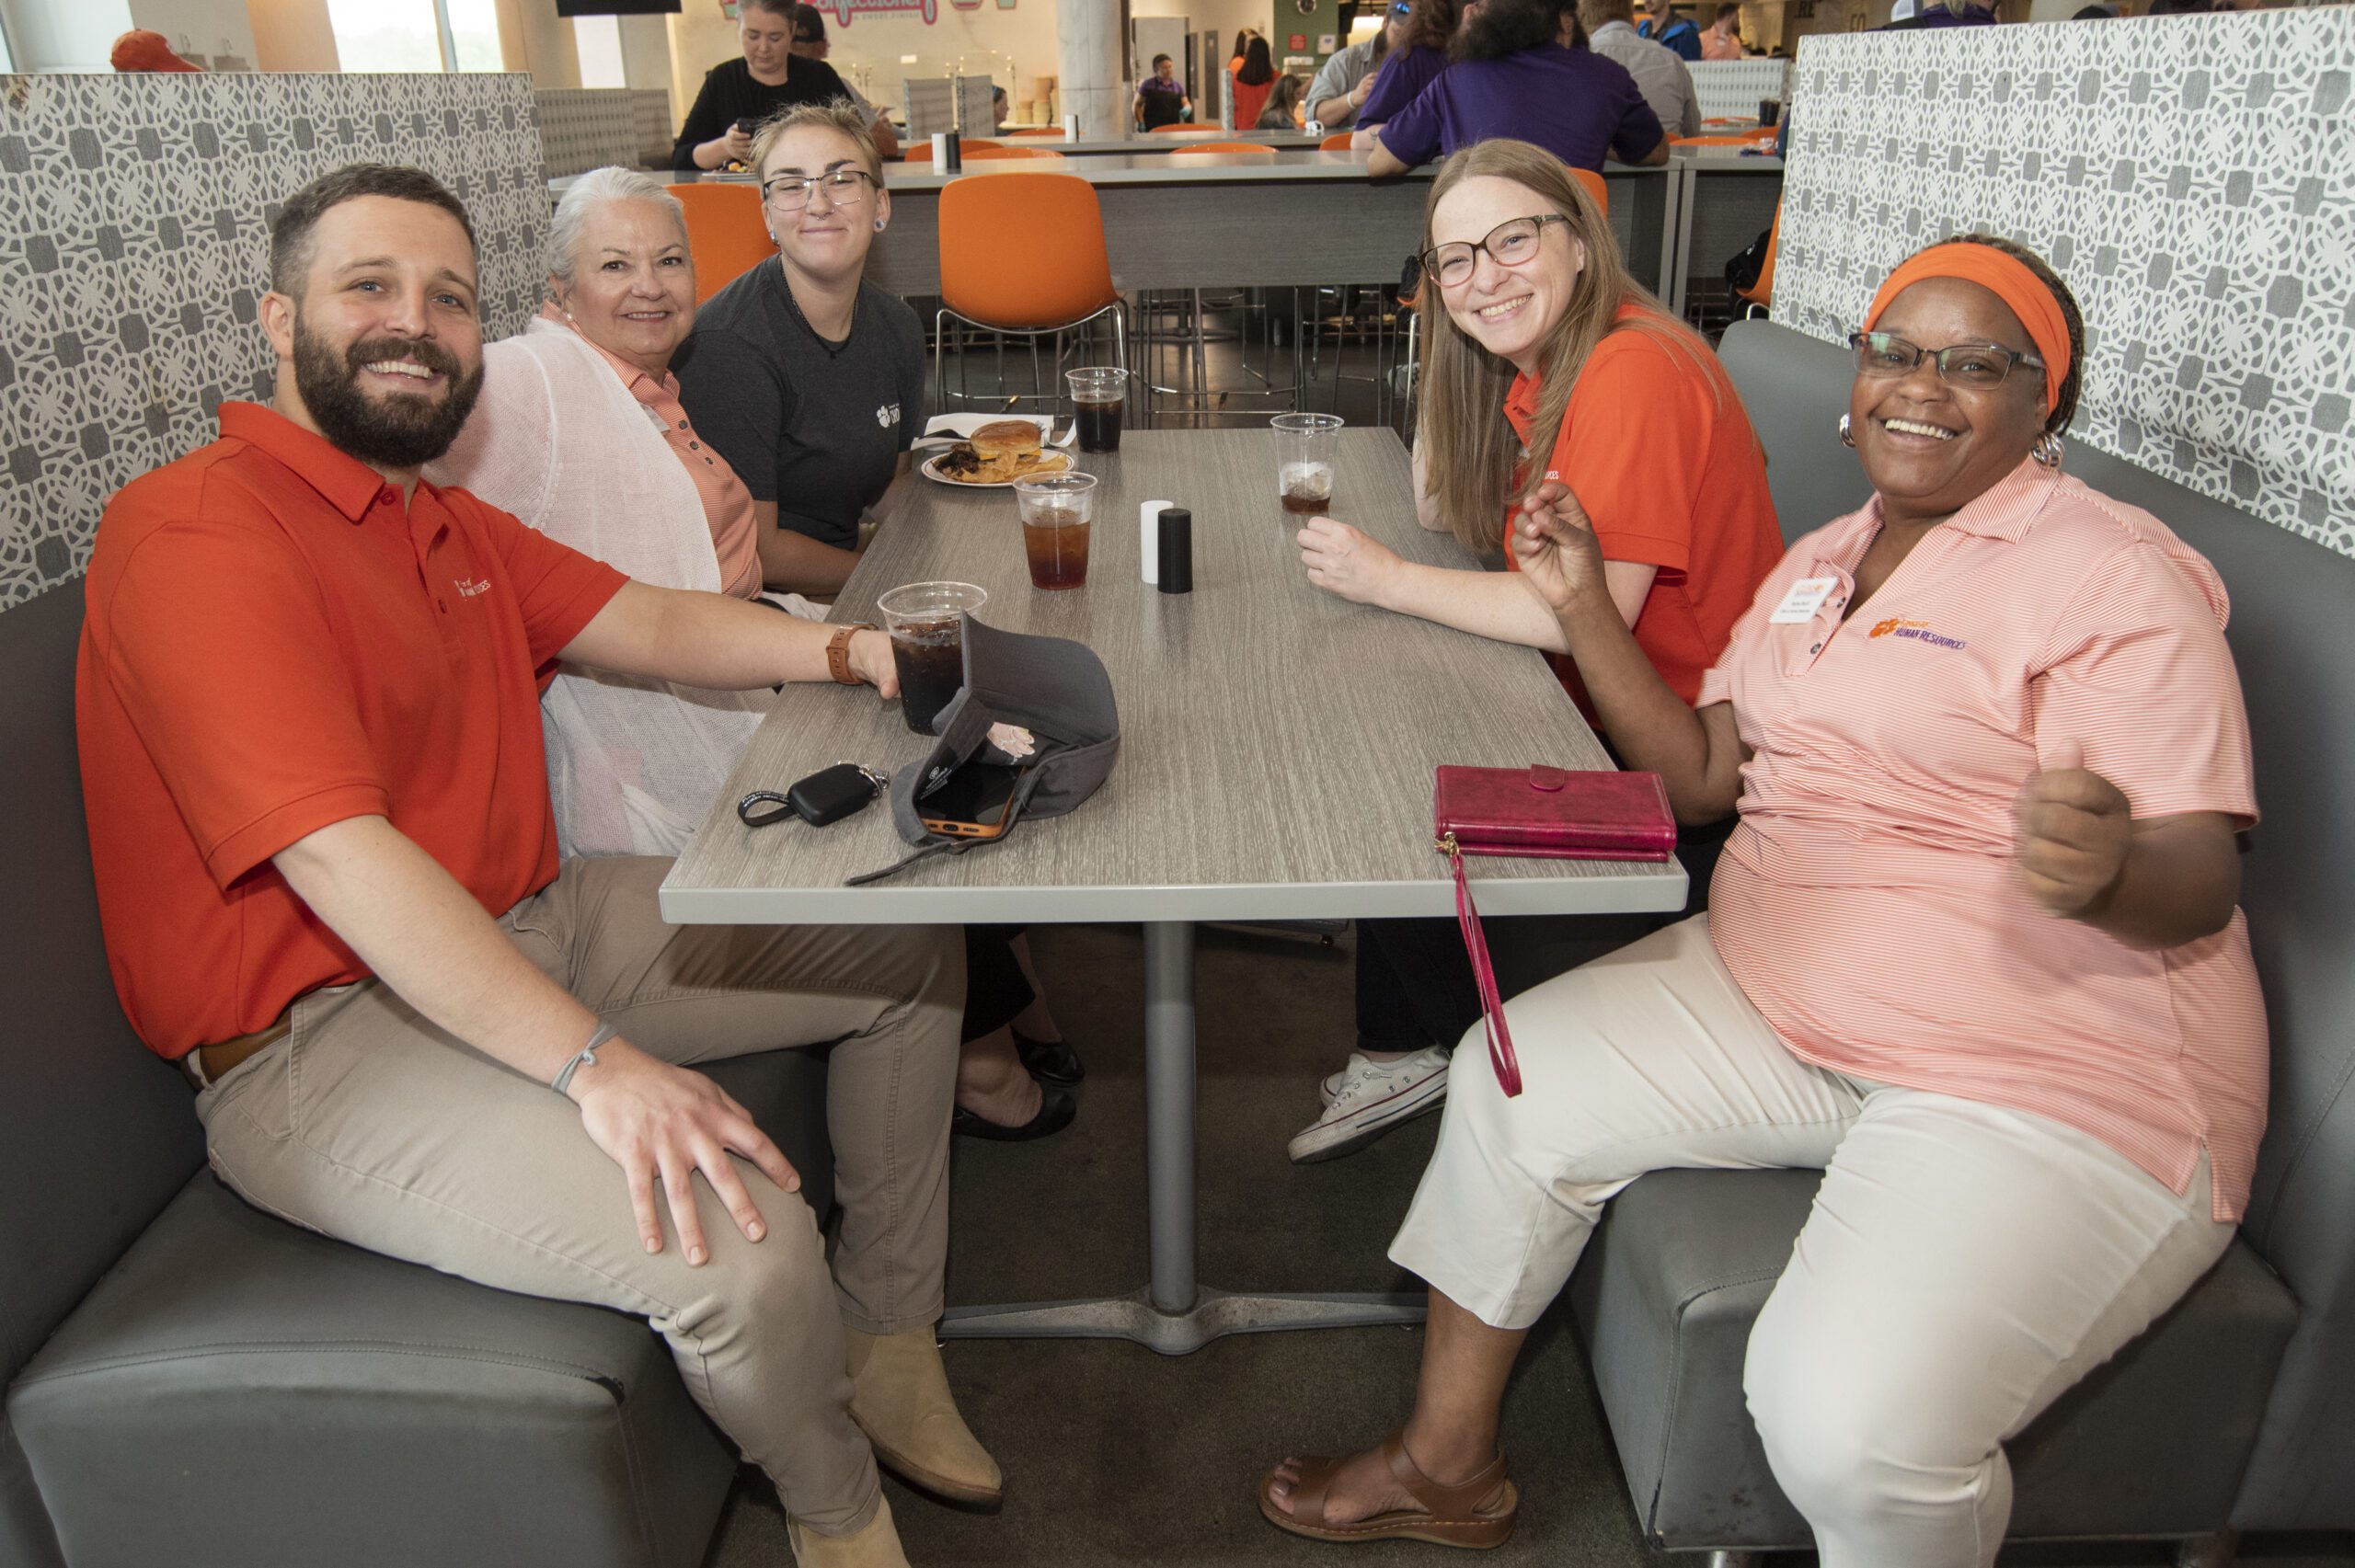 Five coworkers, wearing various Clemson apparel, sit at a booth and smile for a photo.